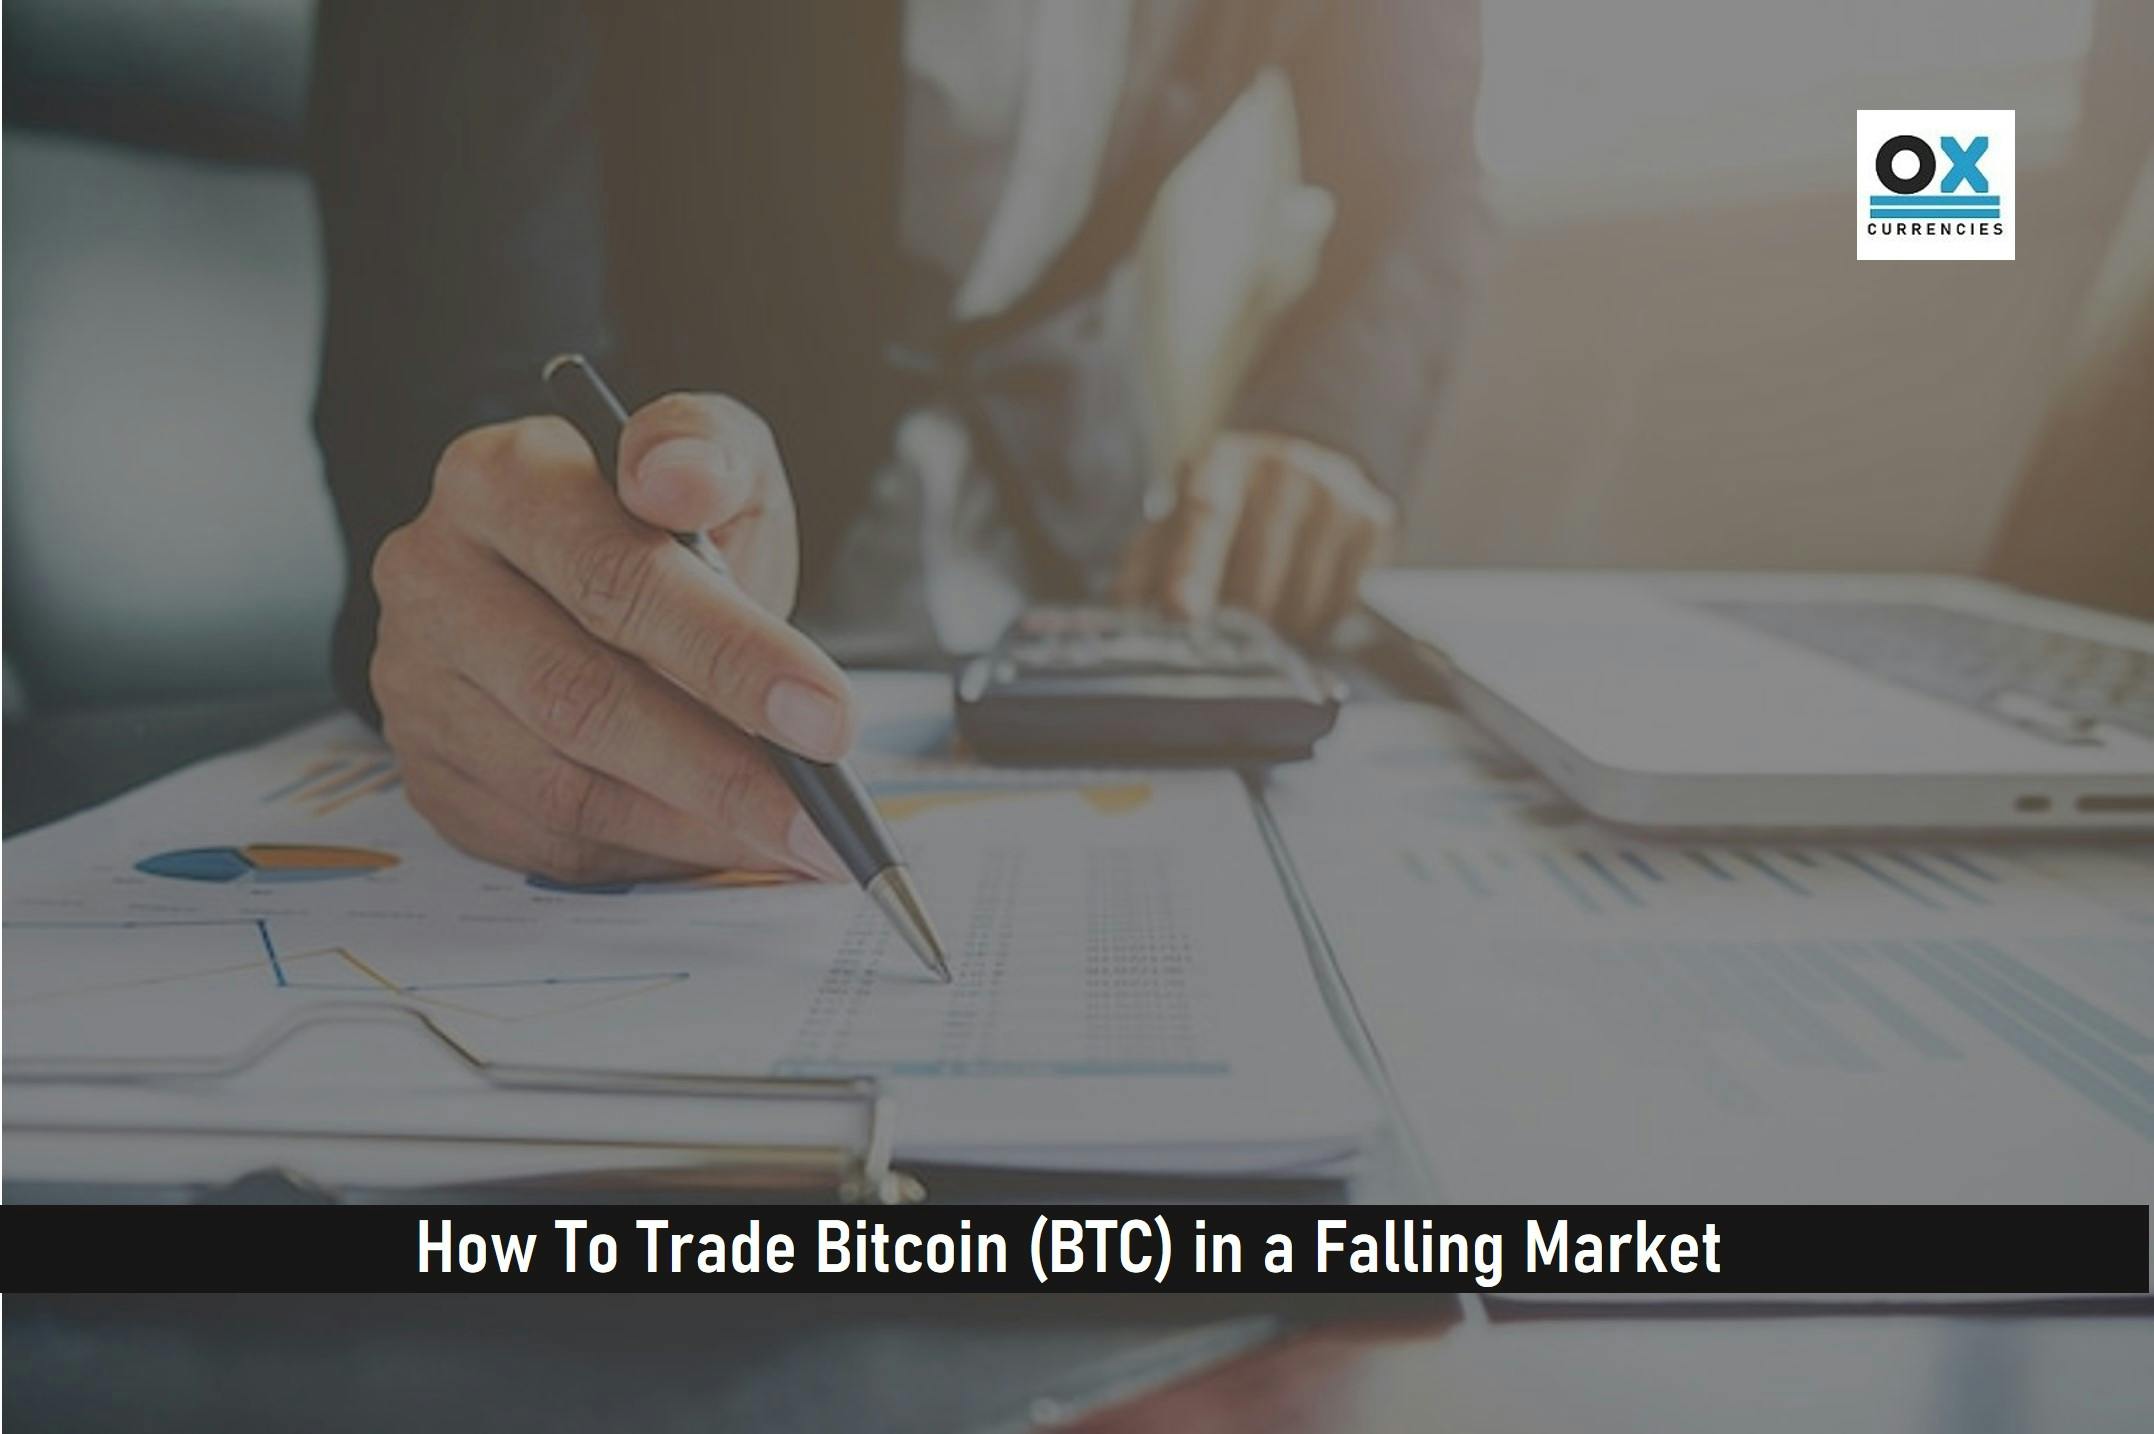 How To Trade Bitcoin (BTC) in a Falling Market